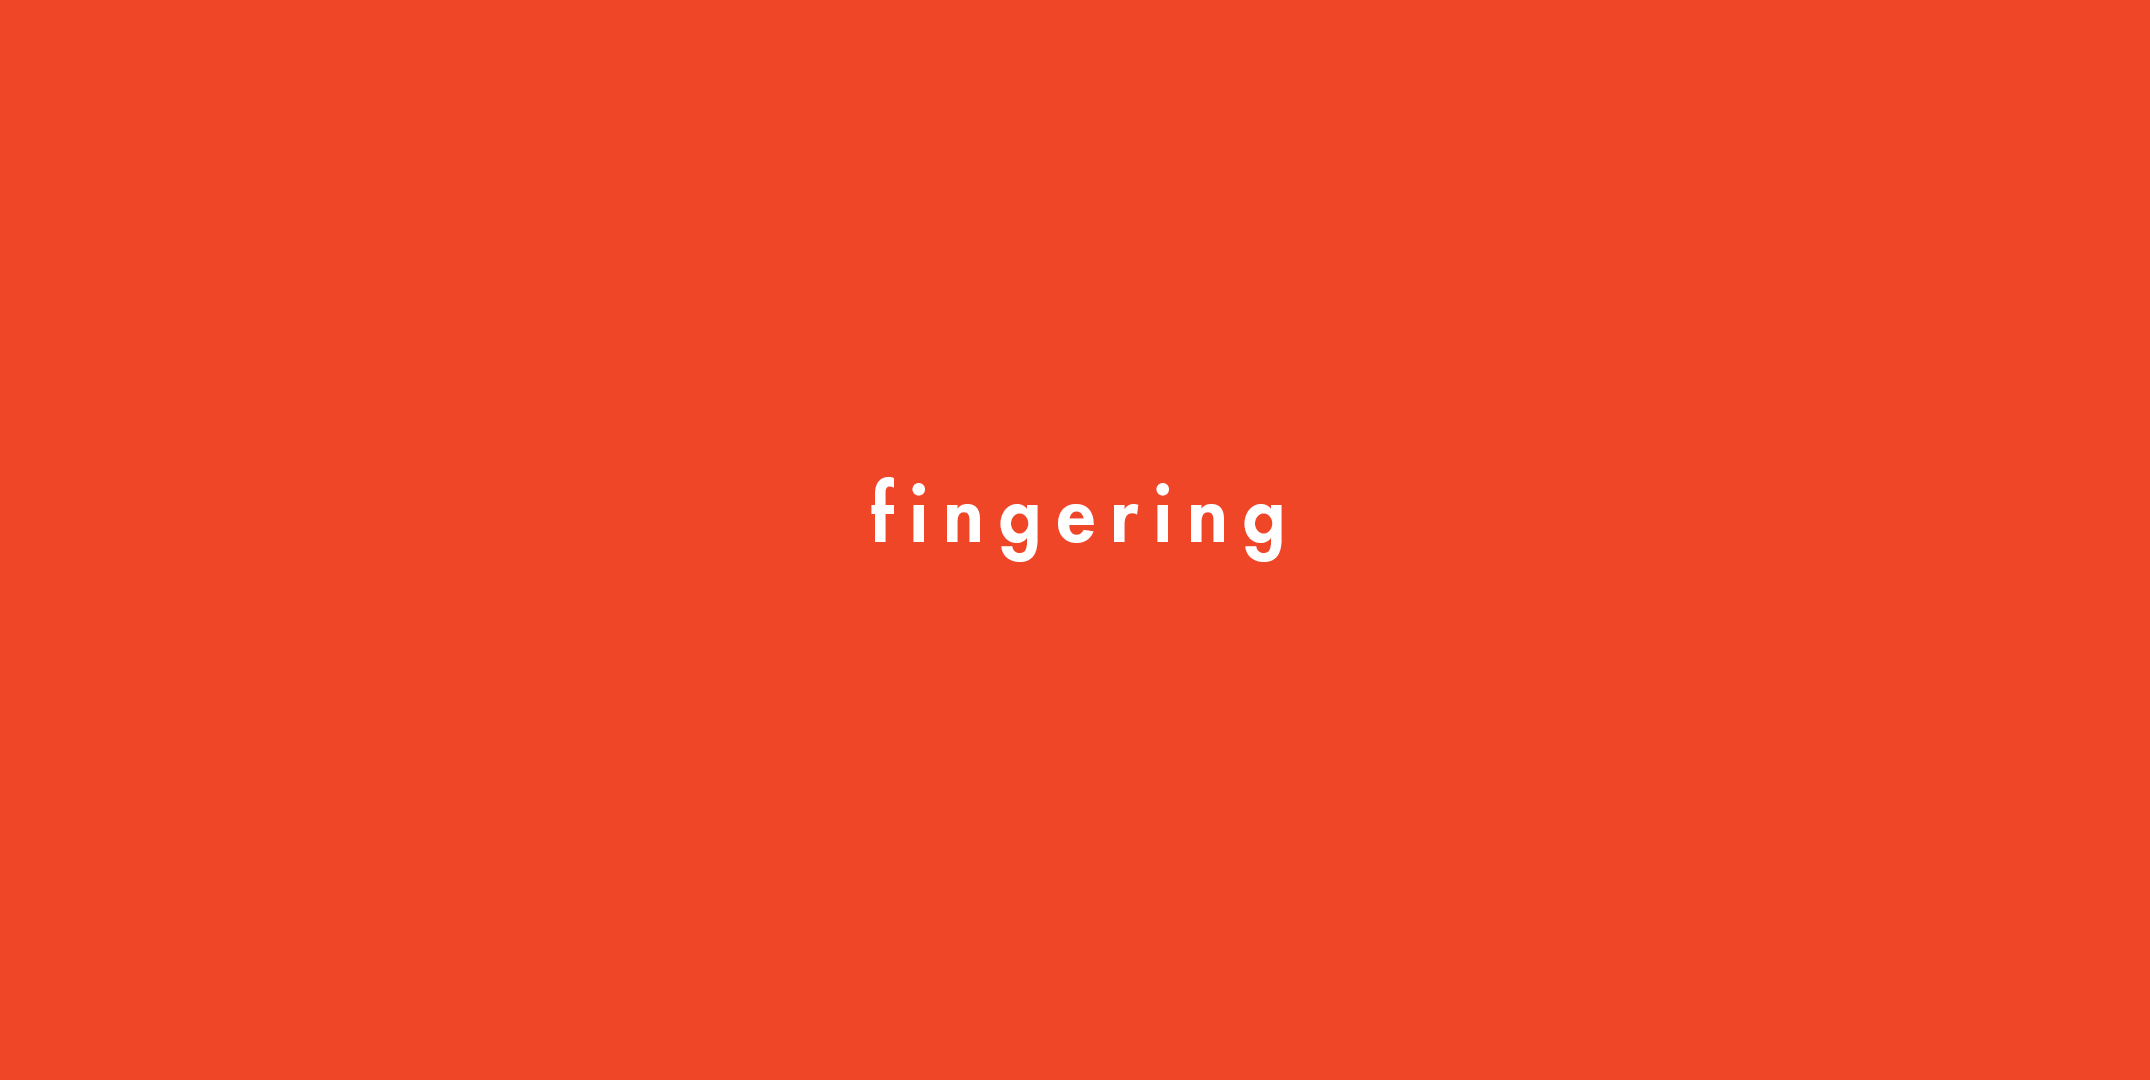 What Does Fingering Mean picture photo